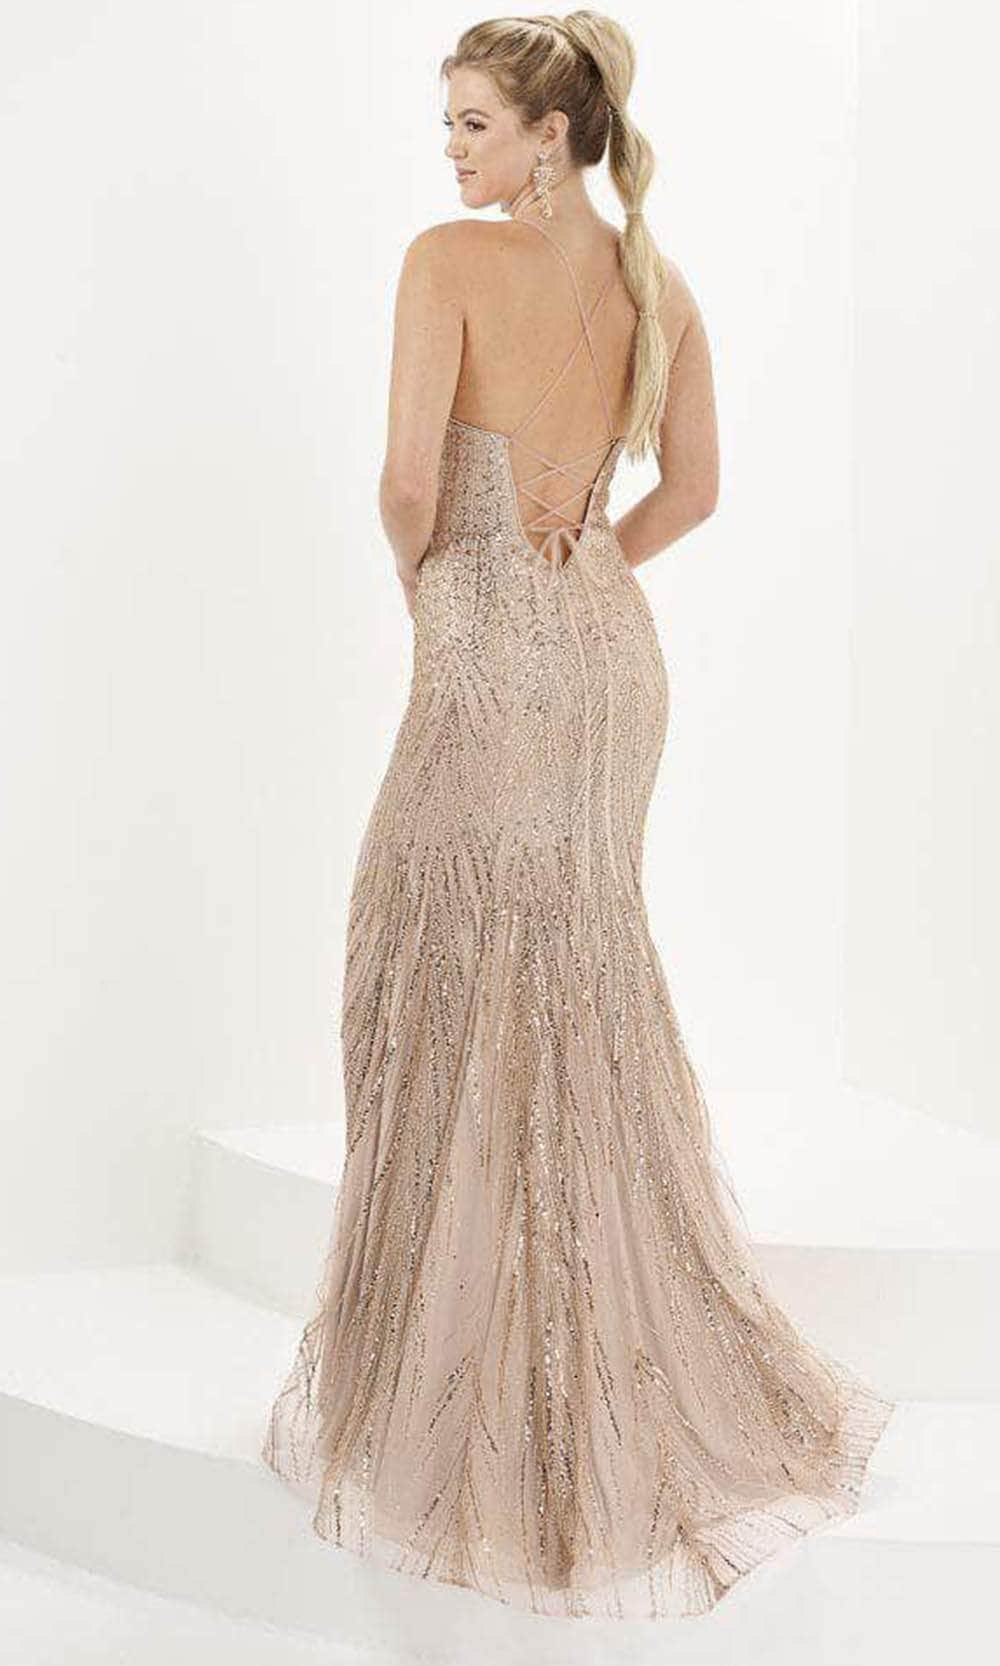 Tiffany Designs 16094 - Embellished Sweetheart Evening Gown Evening Dresses